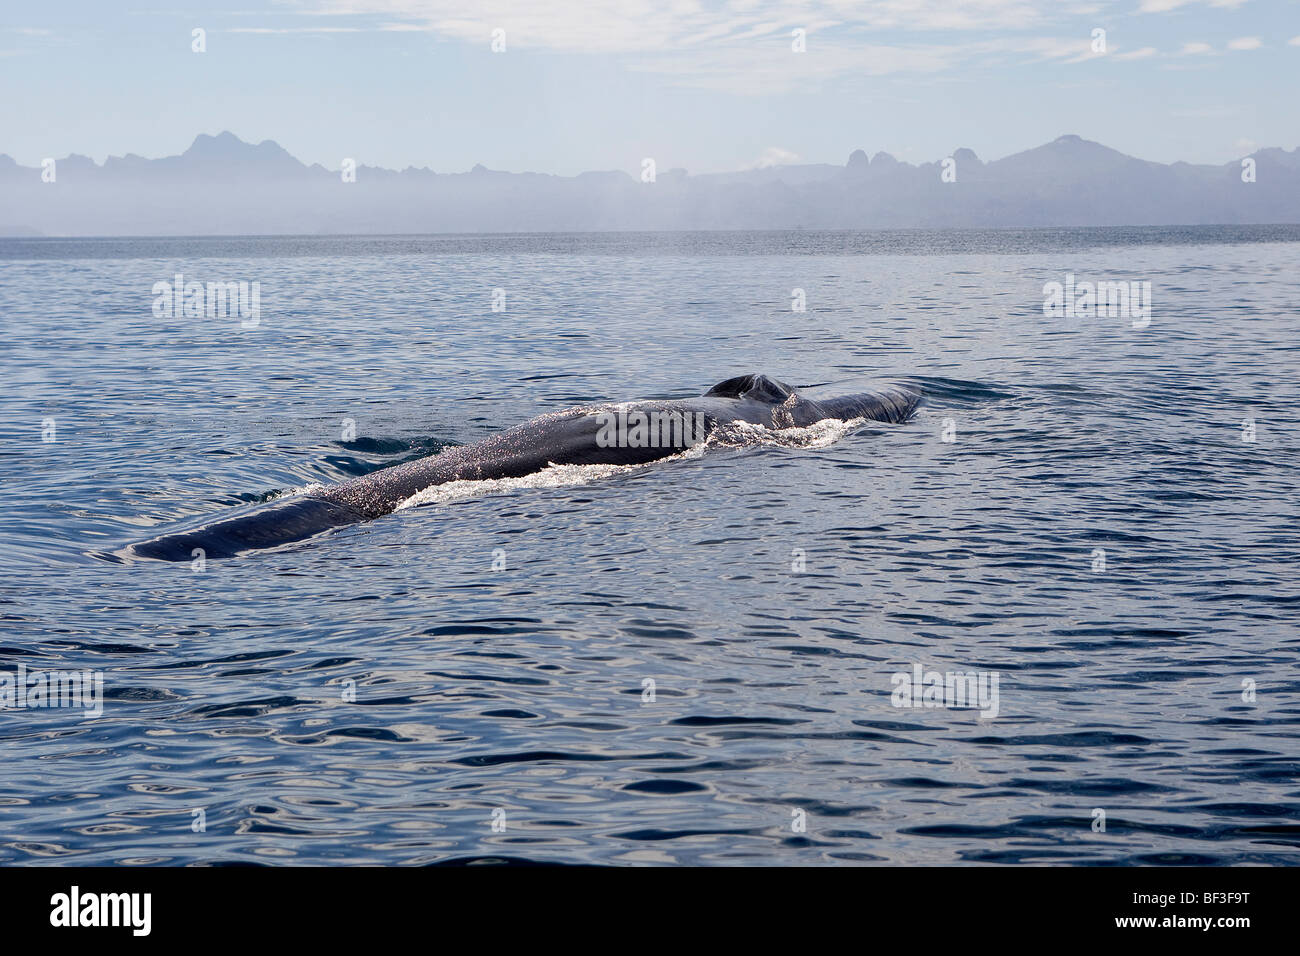 Fin Whale, Finback Whale, Common Rorqual (Balaenoptera physalus) swimming at surface. Stock Photo